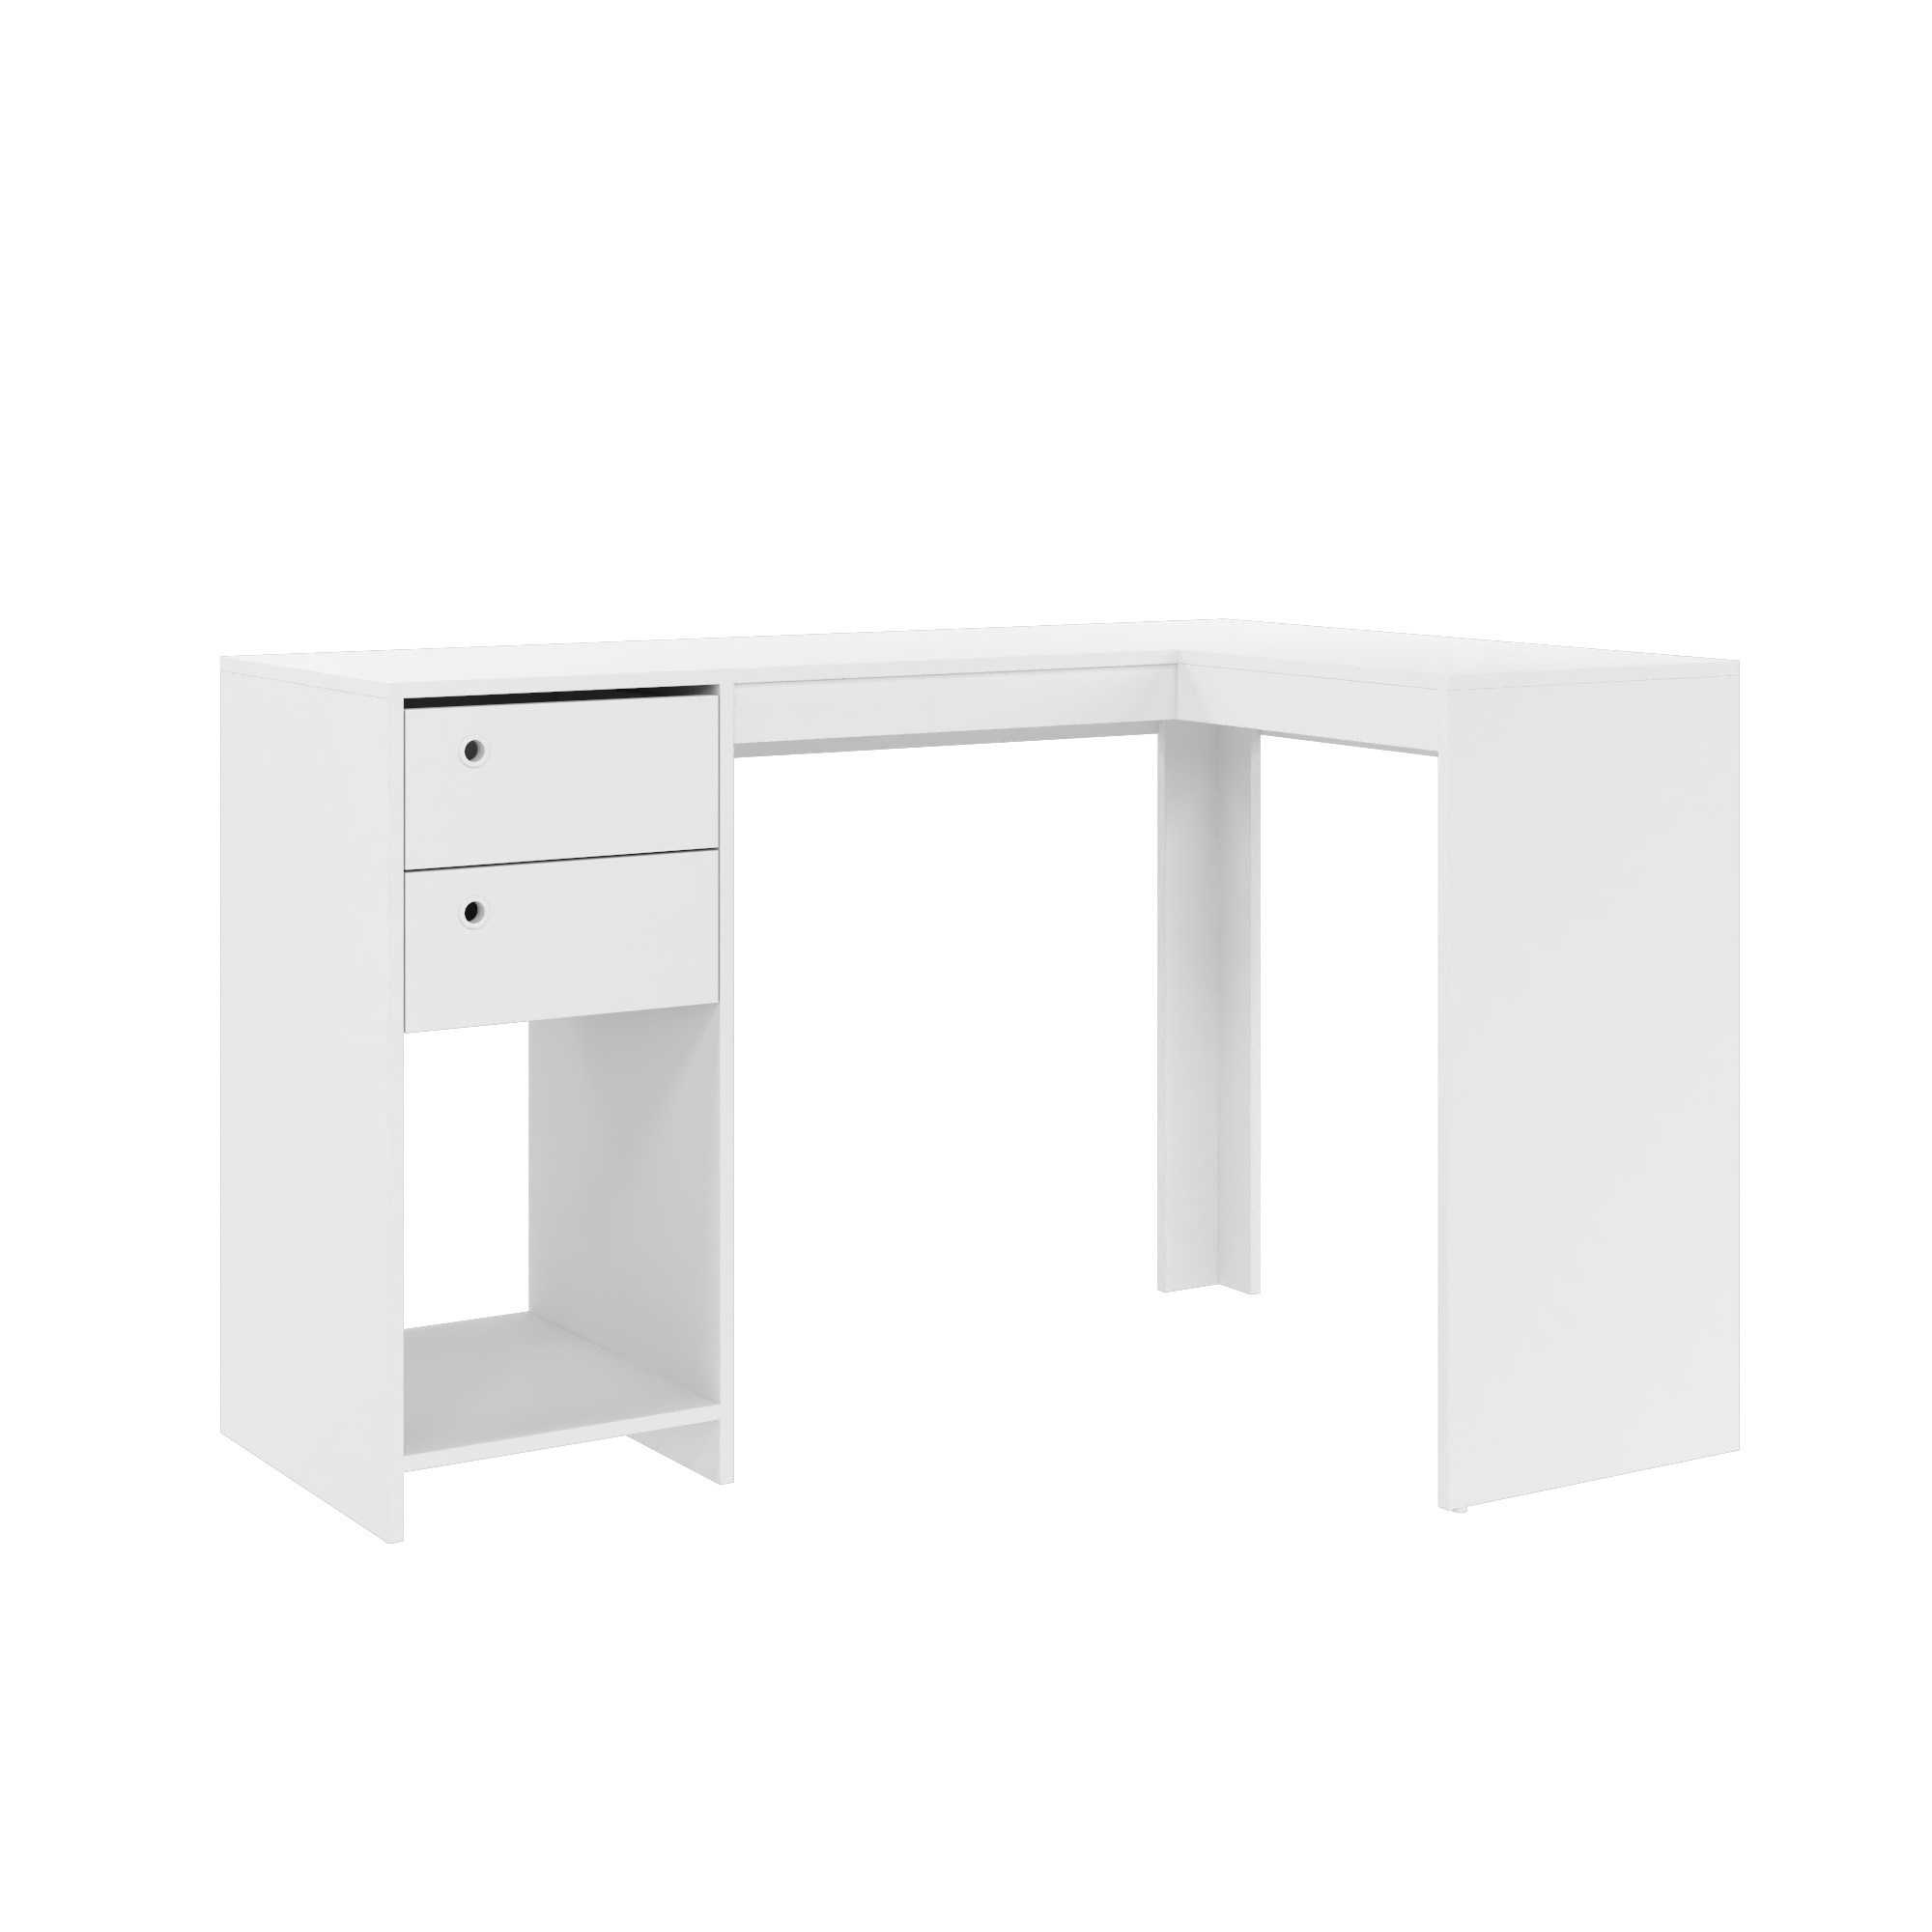 Manhattan Comfort, Palermo Classic L-Desk 2 Drawers and 1 Cubby White, Width 50.39 in, Height 31.89 in, Depth 35.43 in, Model 41AMC